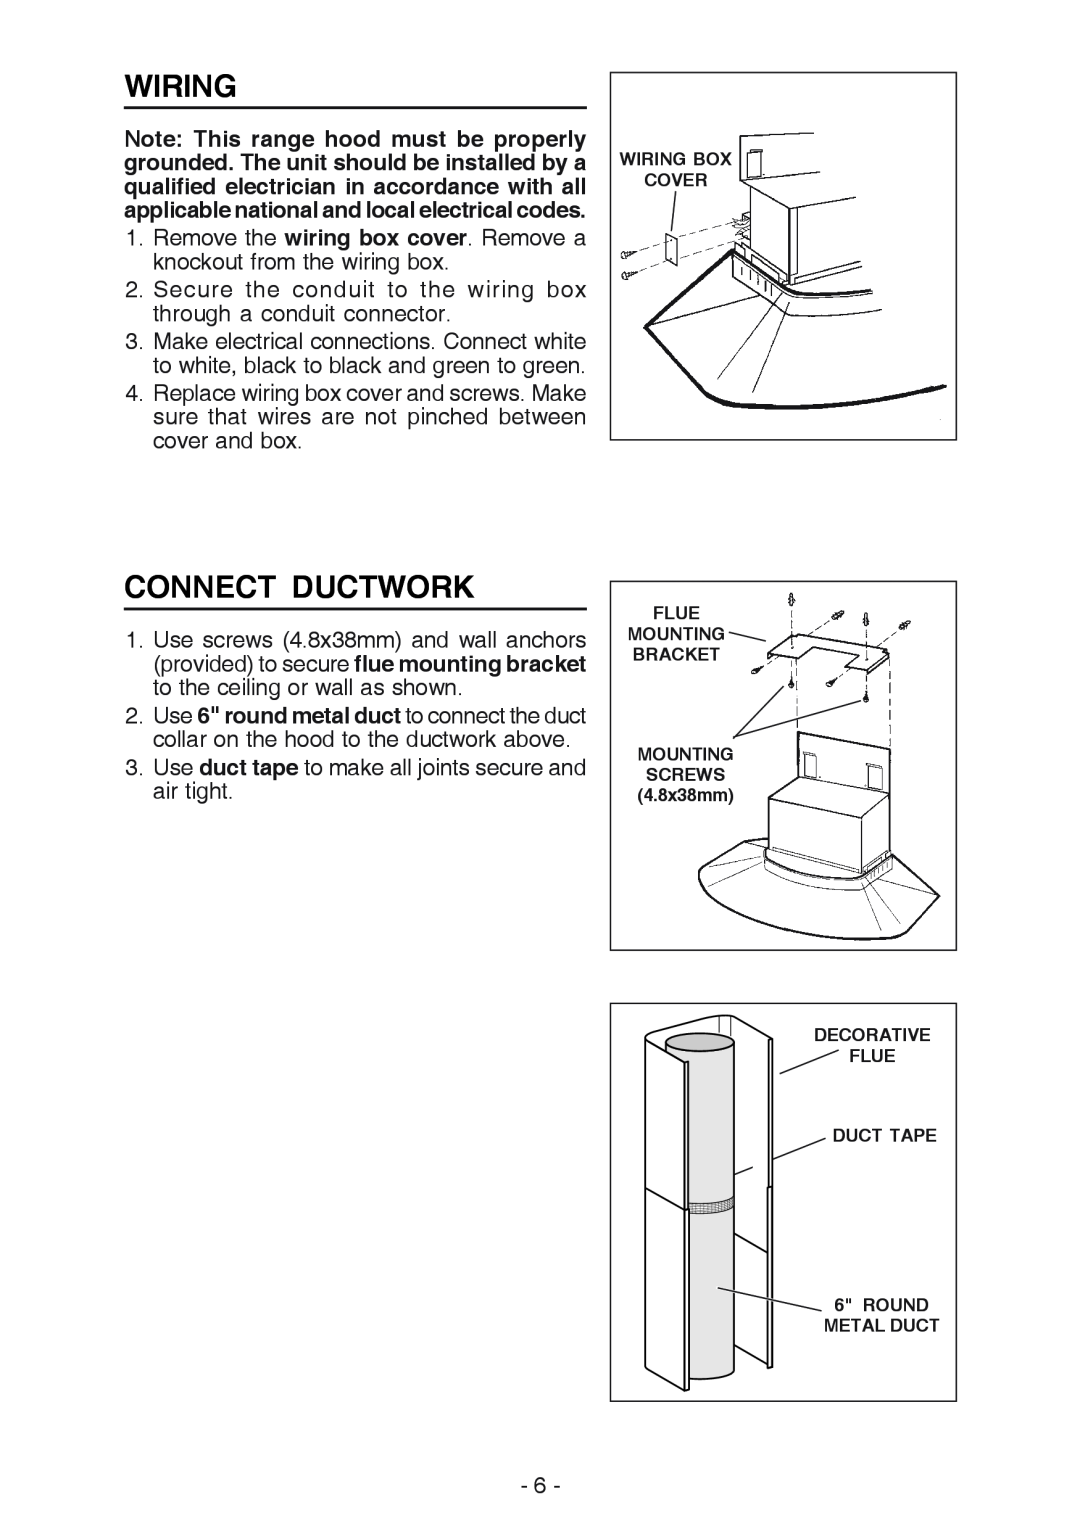 NuTone NP629004 manual Wiring, Connect Ductwork 